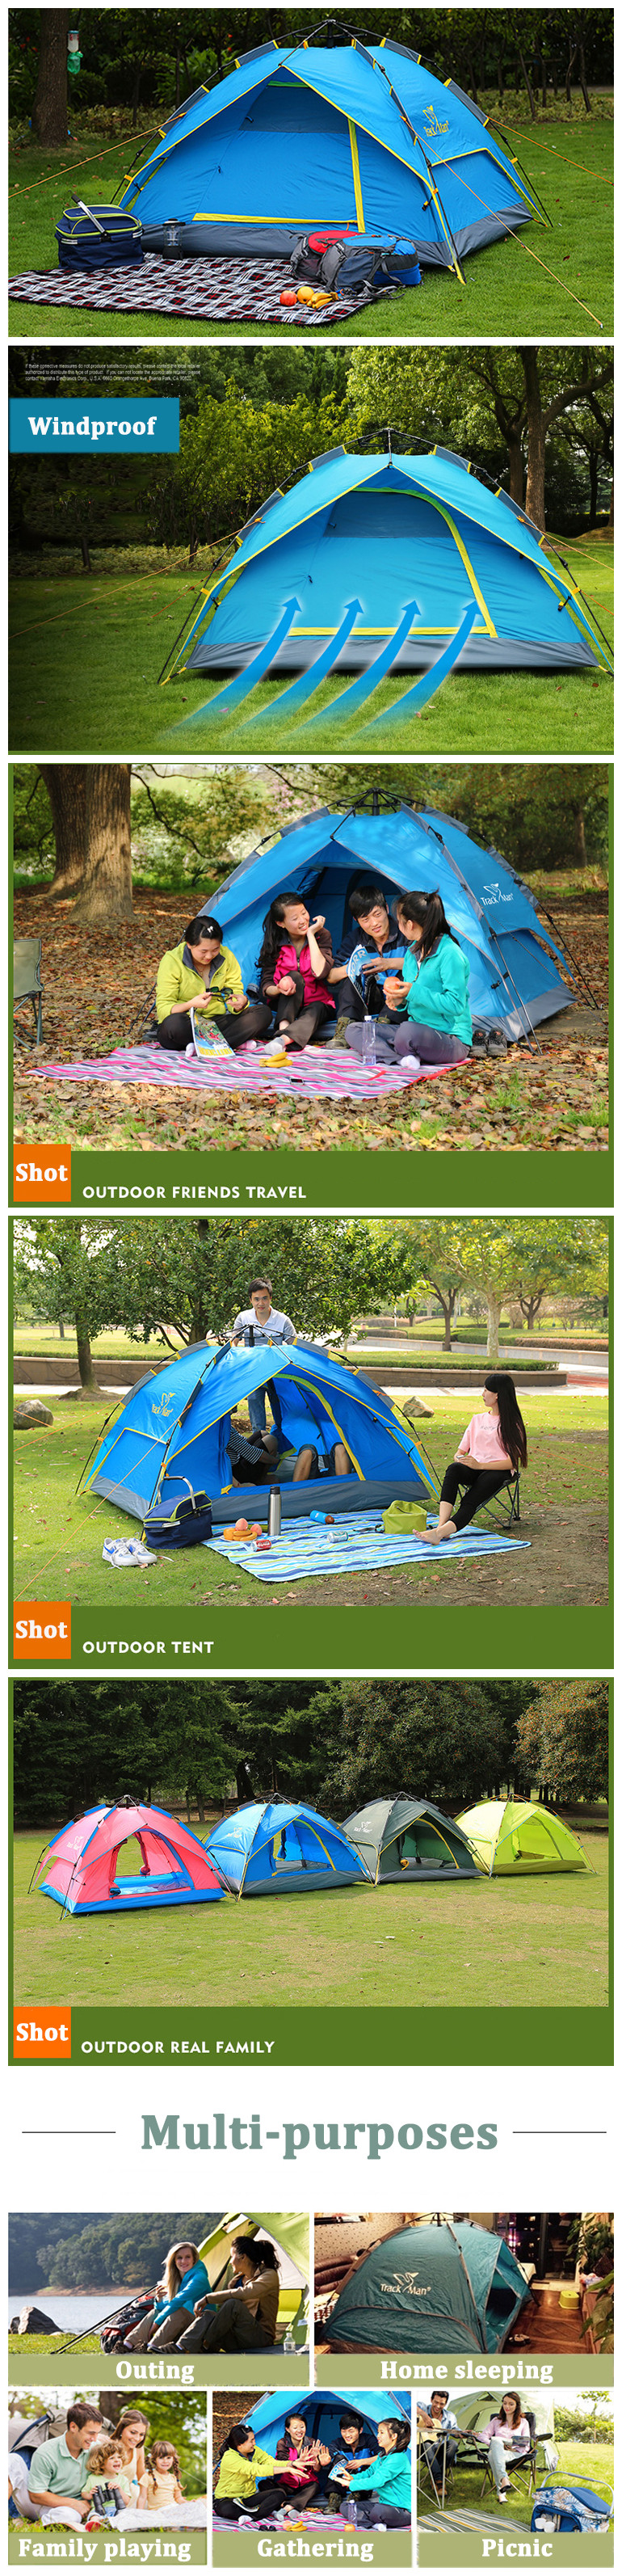 Details about   Trackman TM1111 3-4 People Automatic Tent Waterproof Double Layer Camping Sunsh 